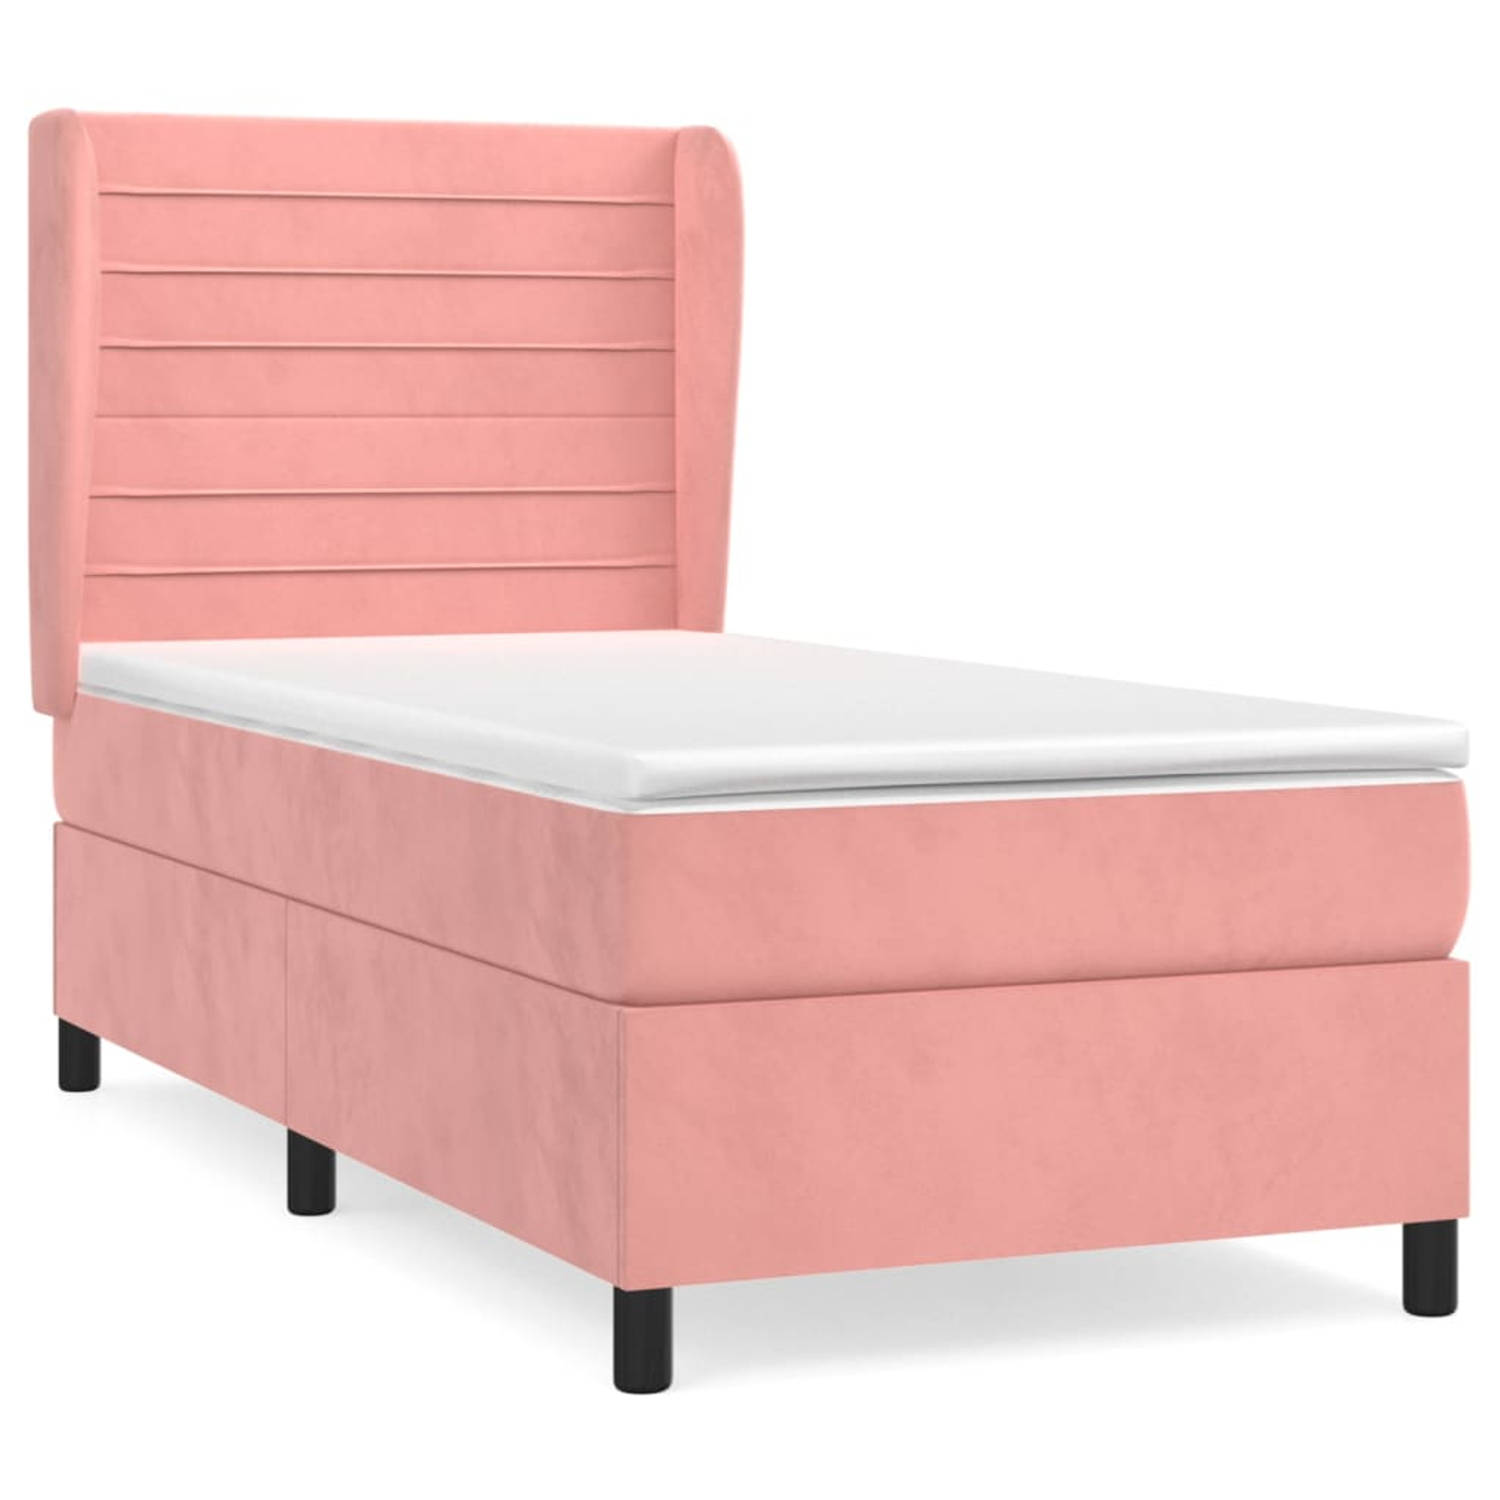 The Living Store Boxspringbed - Fluweel - Roze - 203 x 103 x 118/128 cm - Pocketvering